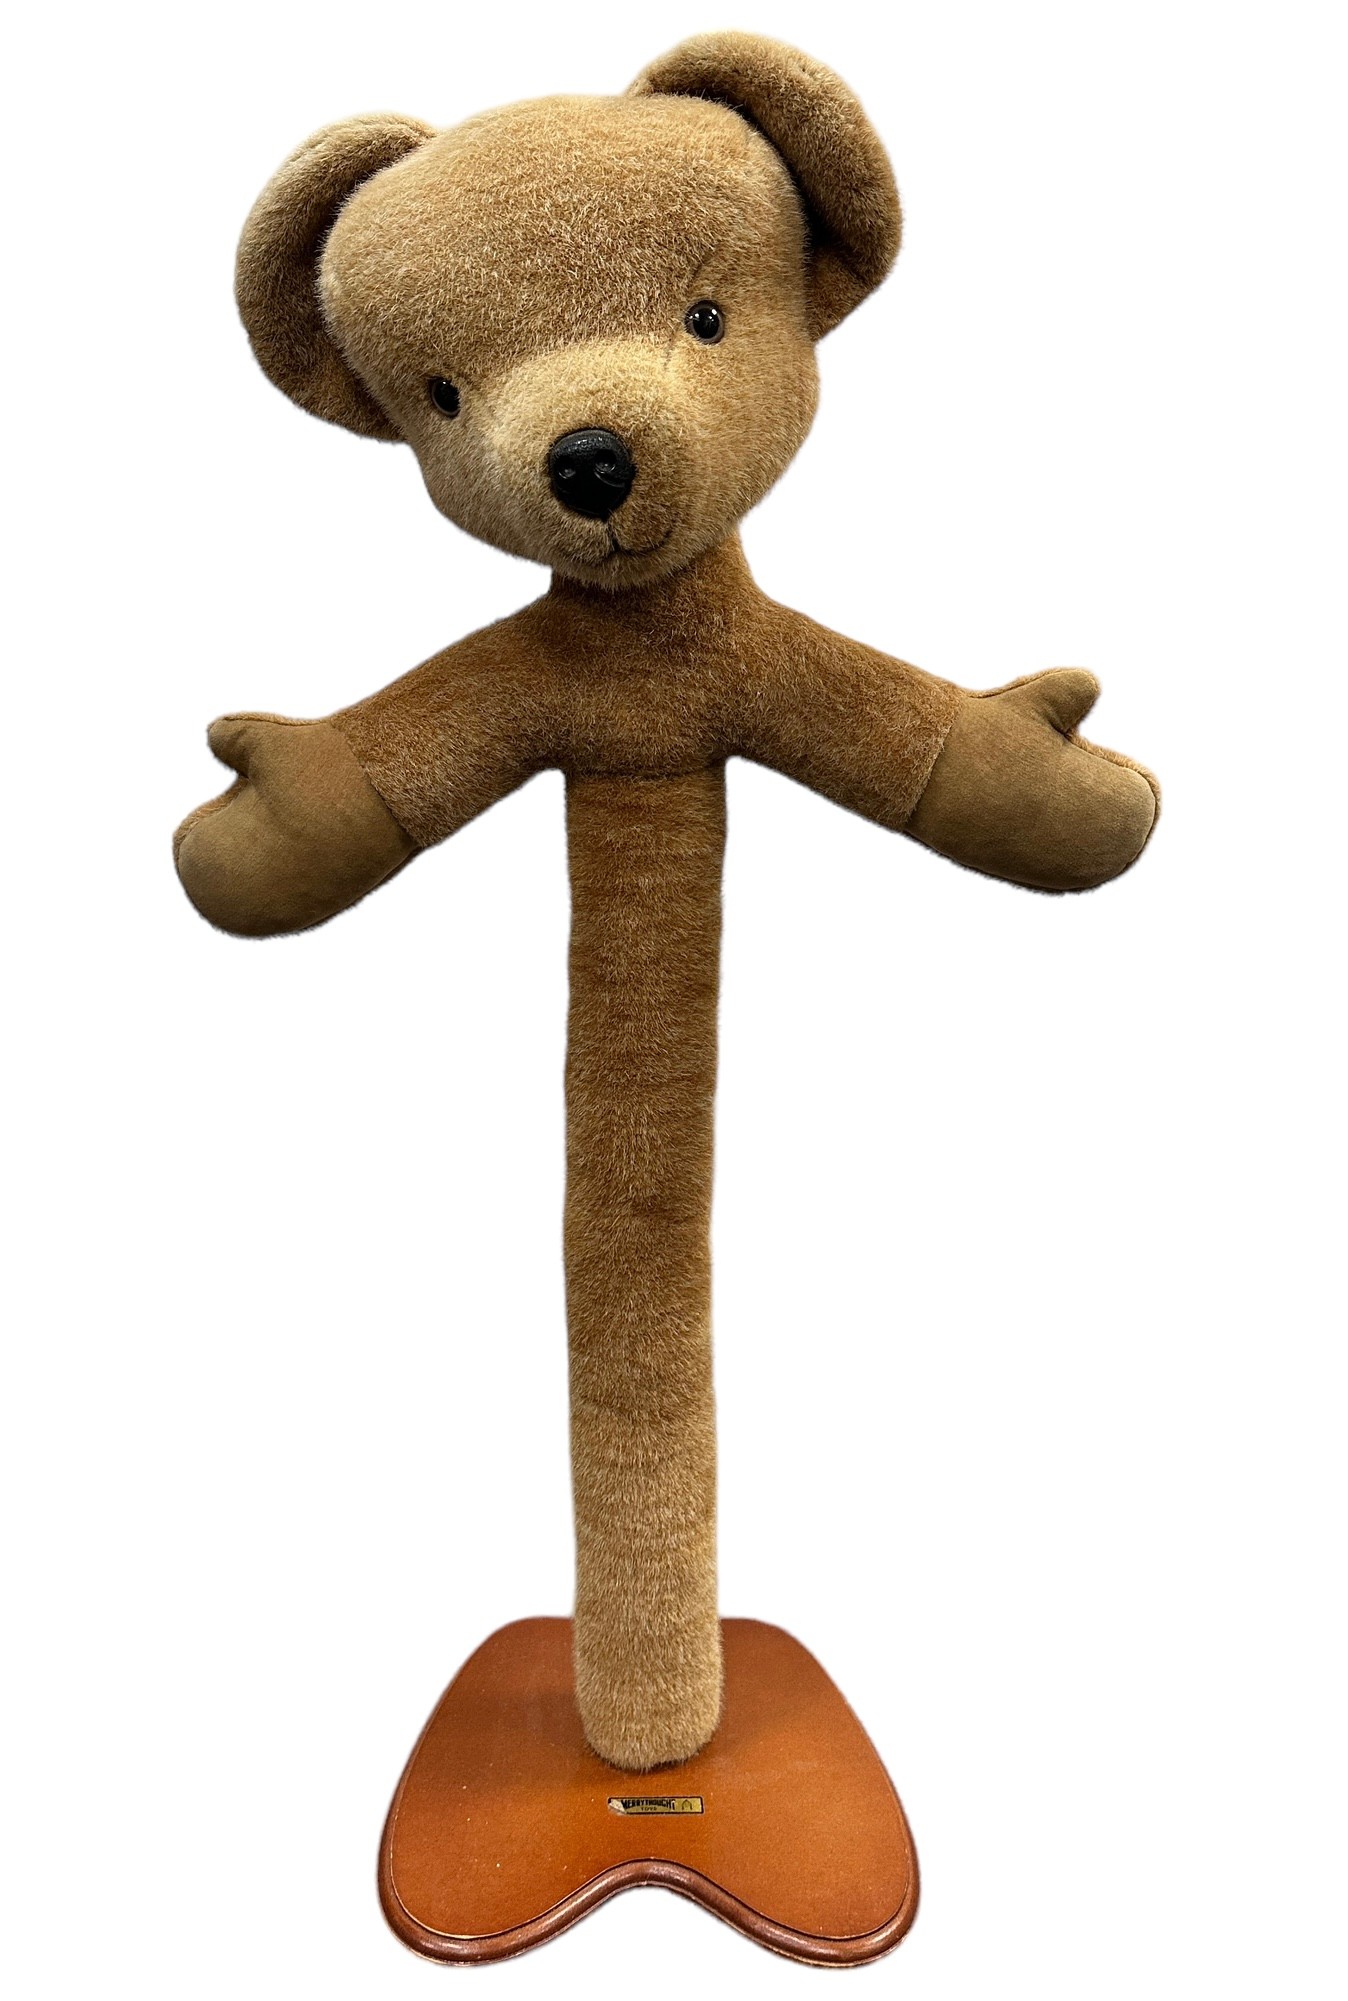 Merrythought Teddy clothes stand